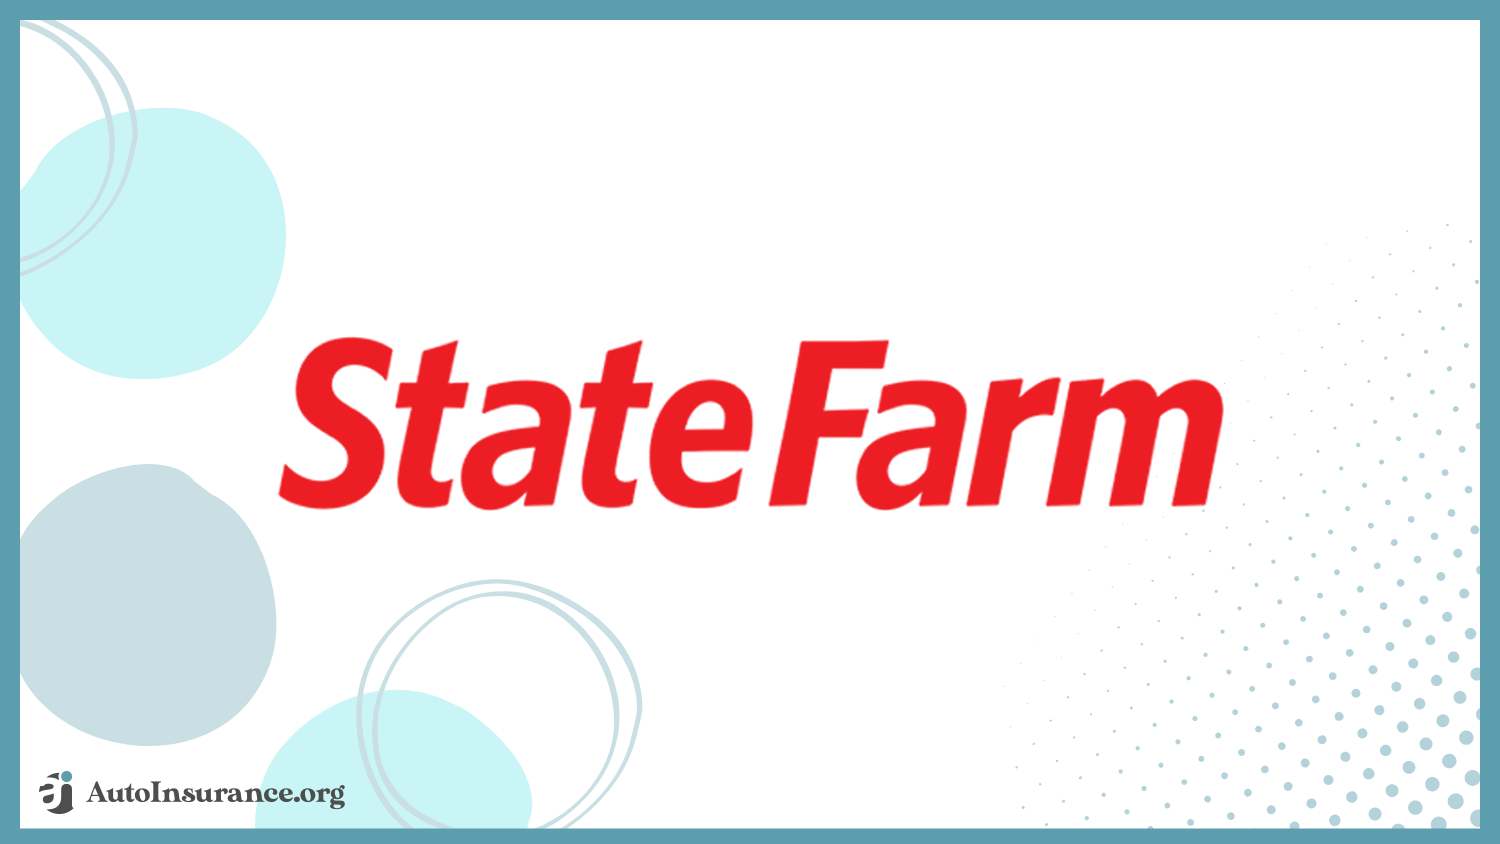 State Farm: Best Auto Insurance for Undocumented Immigrants 